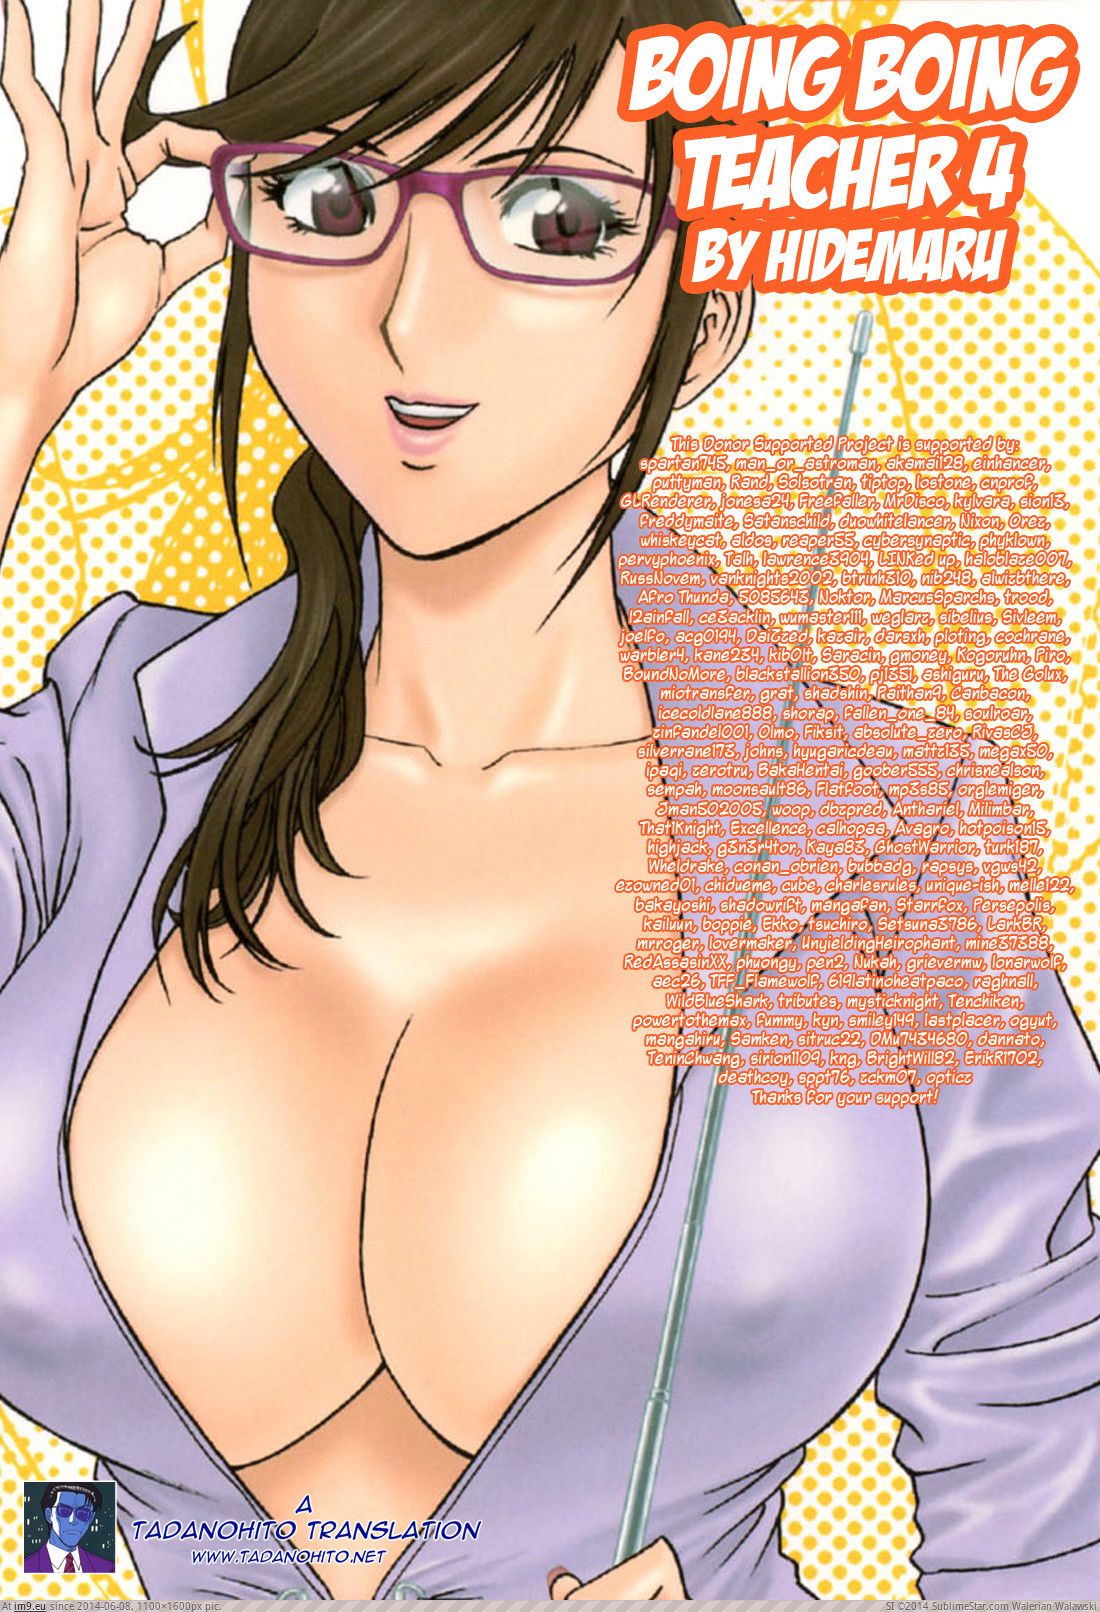 [Hentai] Boing Boing Teacher 4 by Hidemaru [Previous volumes in comments] 187 (in My r/HENTAI favs)